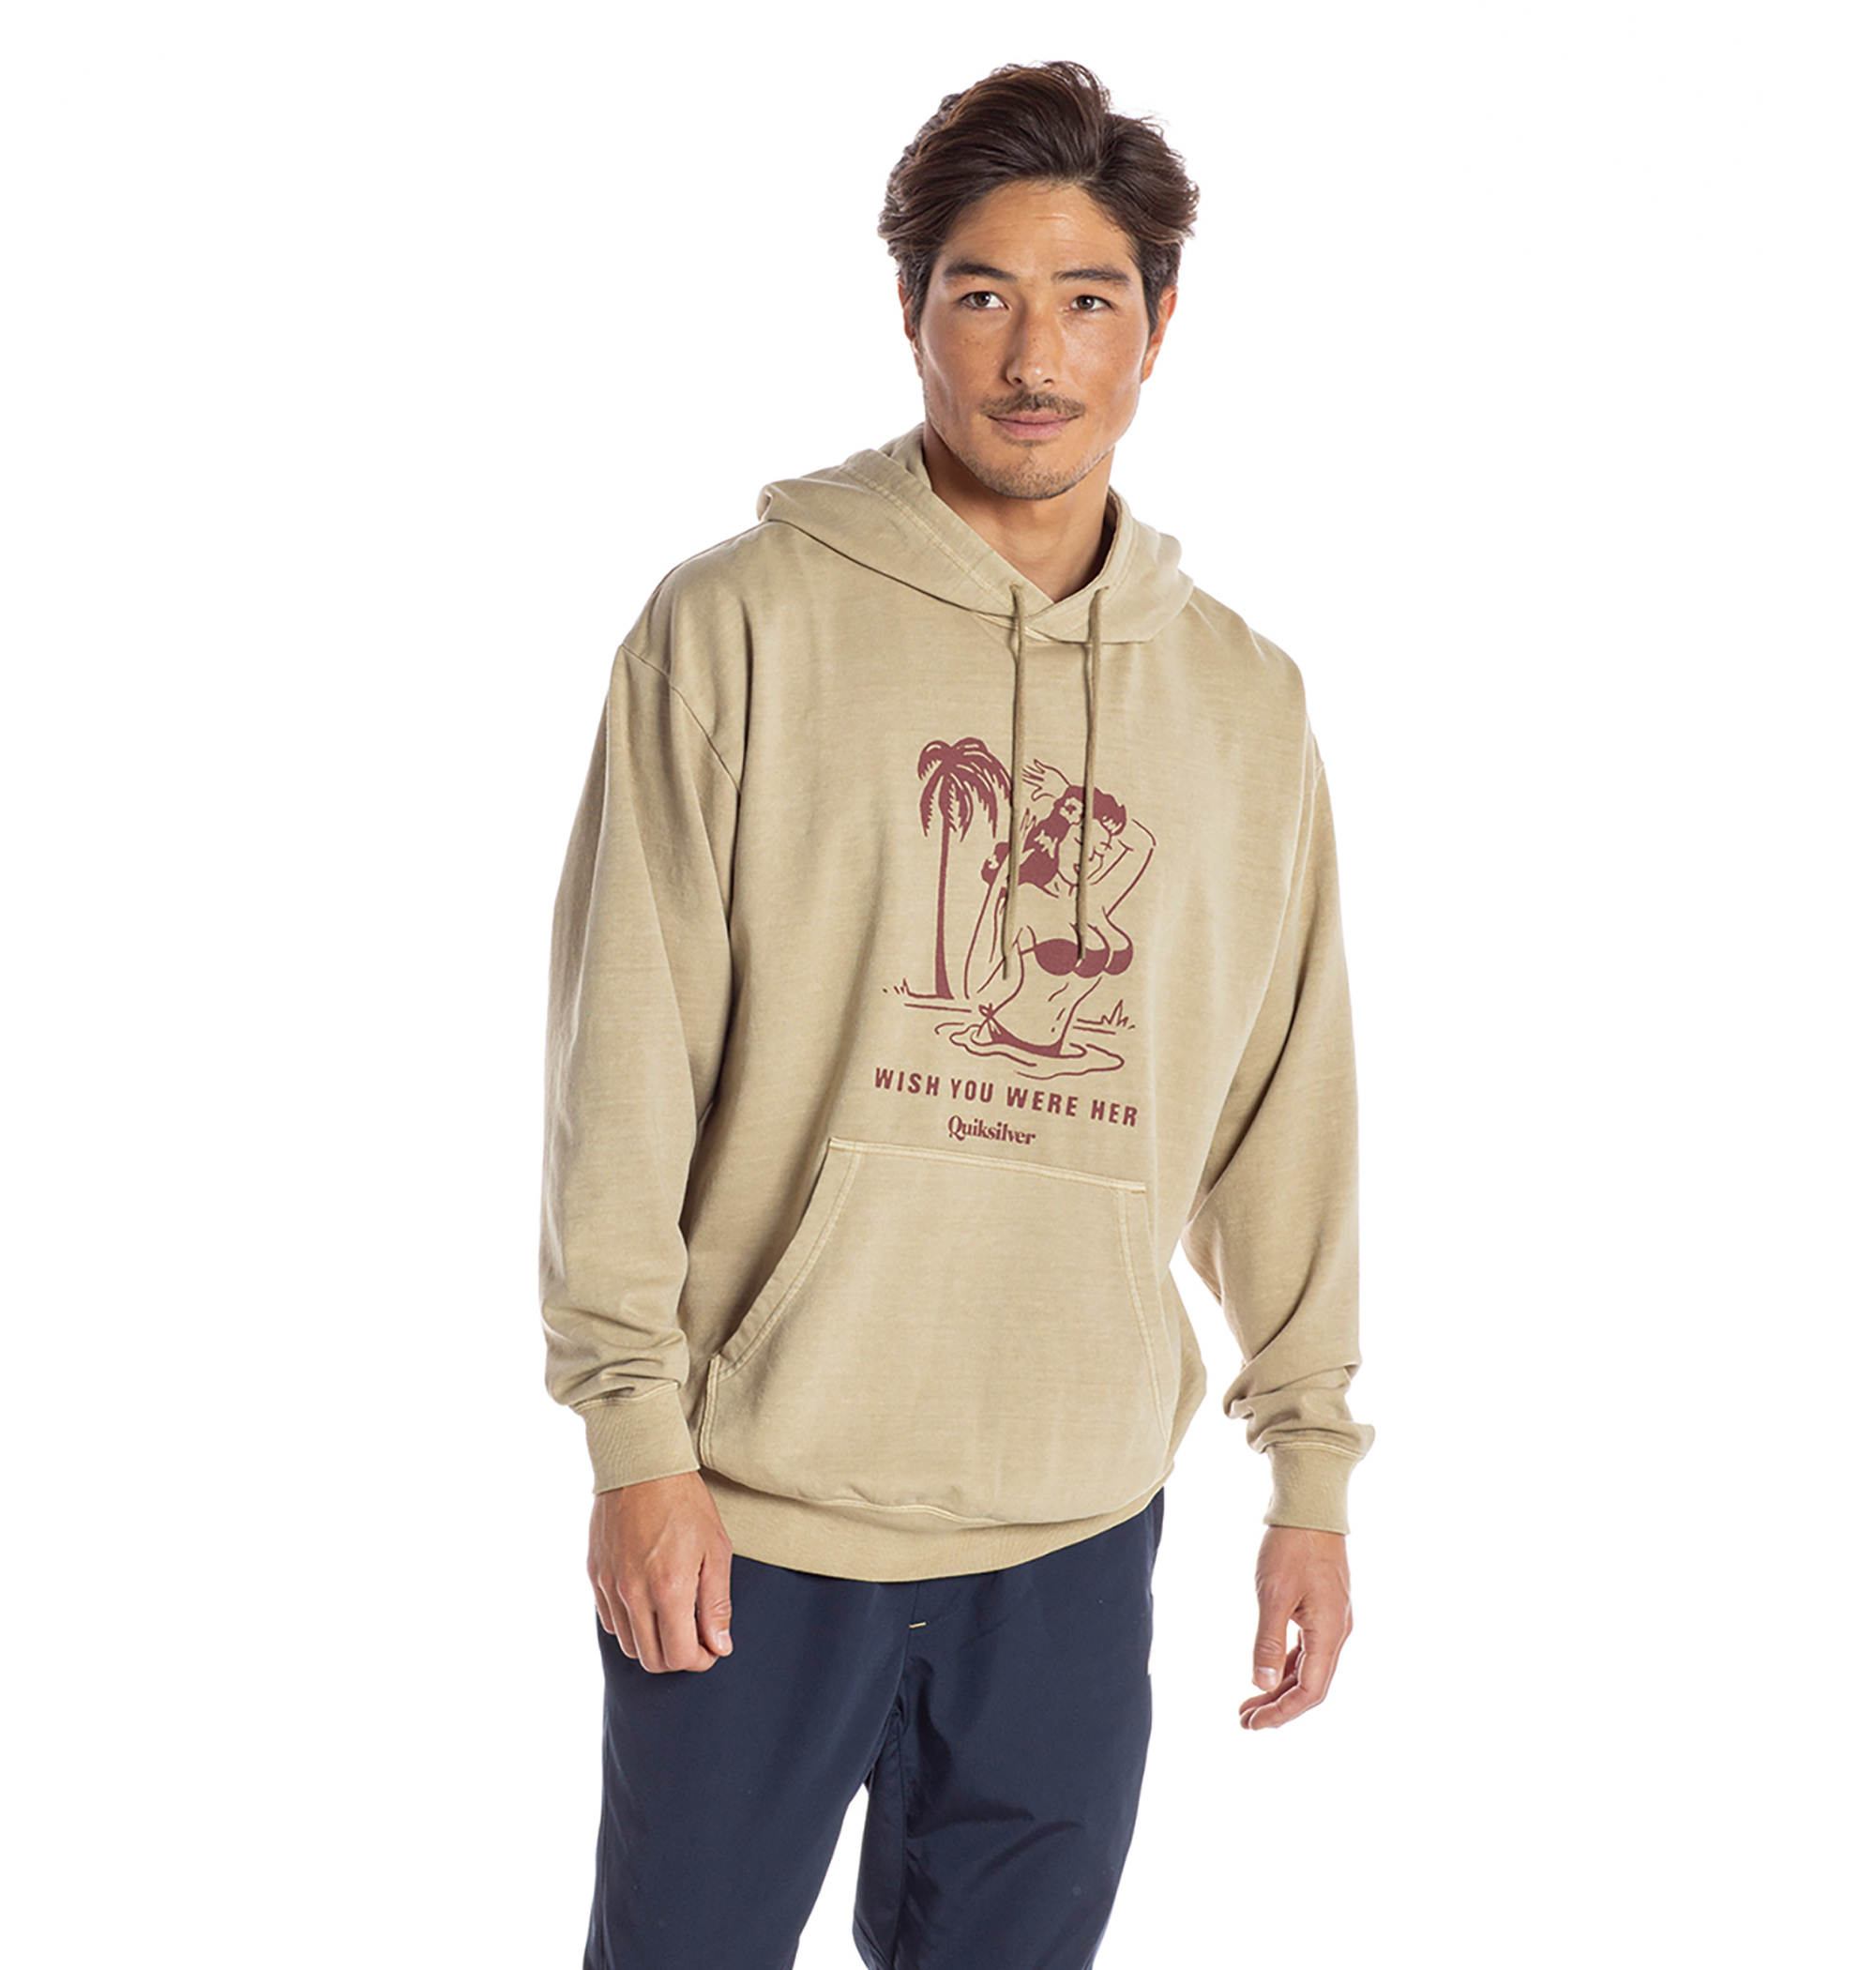 35%OFF！＜Quiksilver＞ ISLAND PARTY HOODIE フロントのデザインプリントがアイキャッチなフーディー